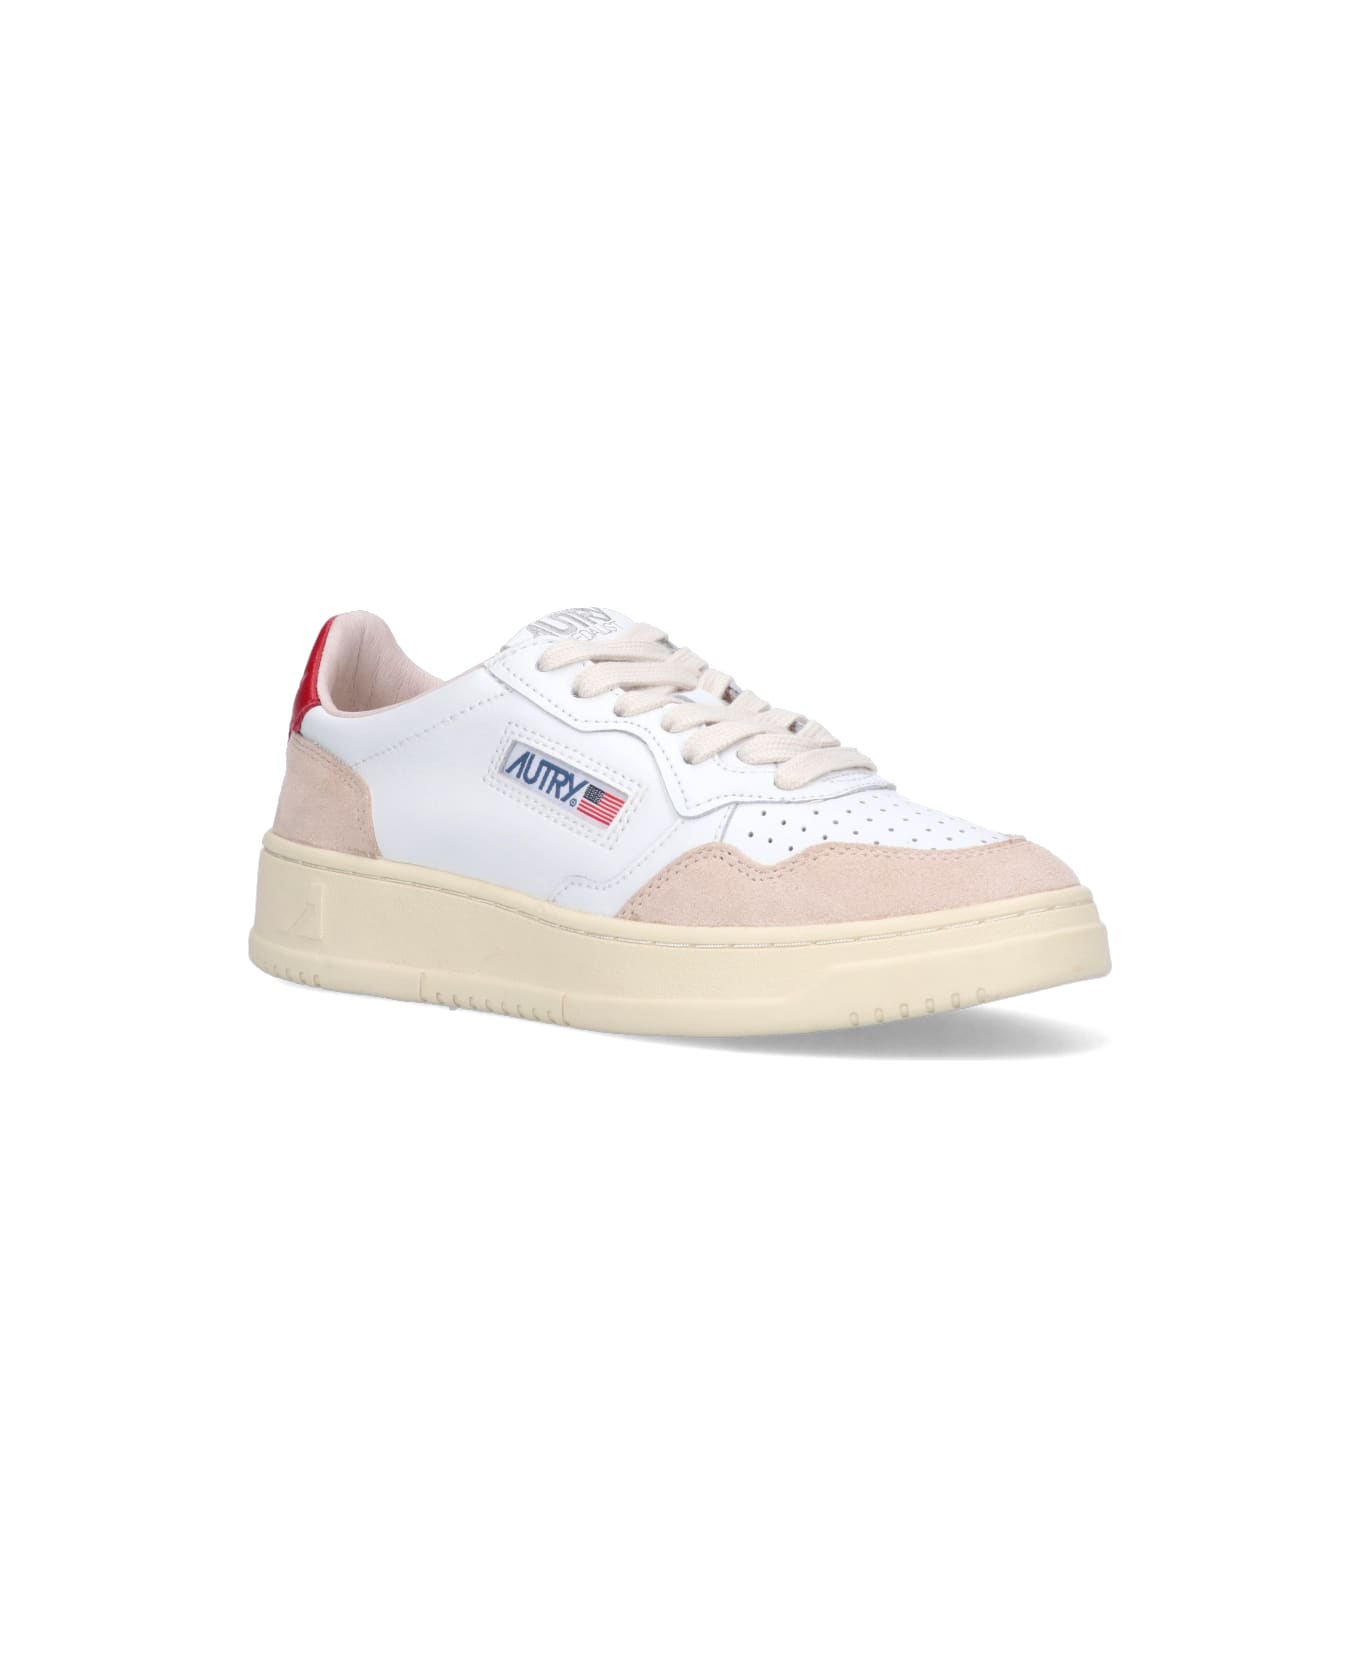 Autry 01 Sneakers In White Suede And Leather - White